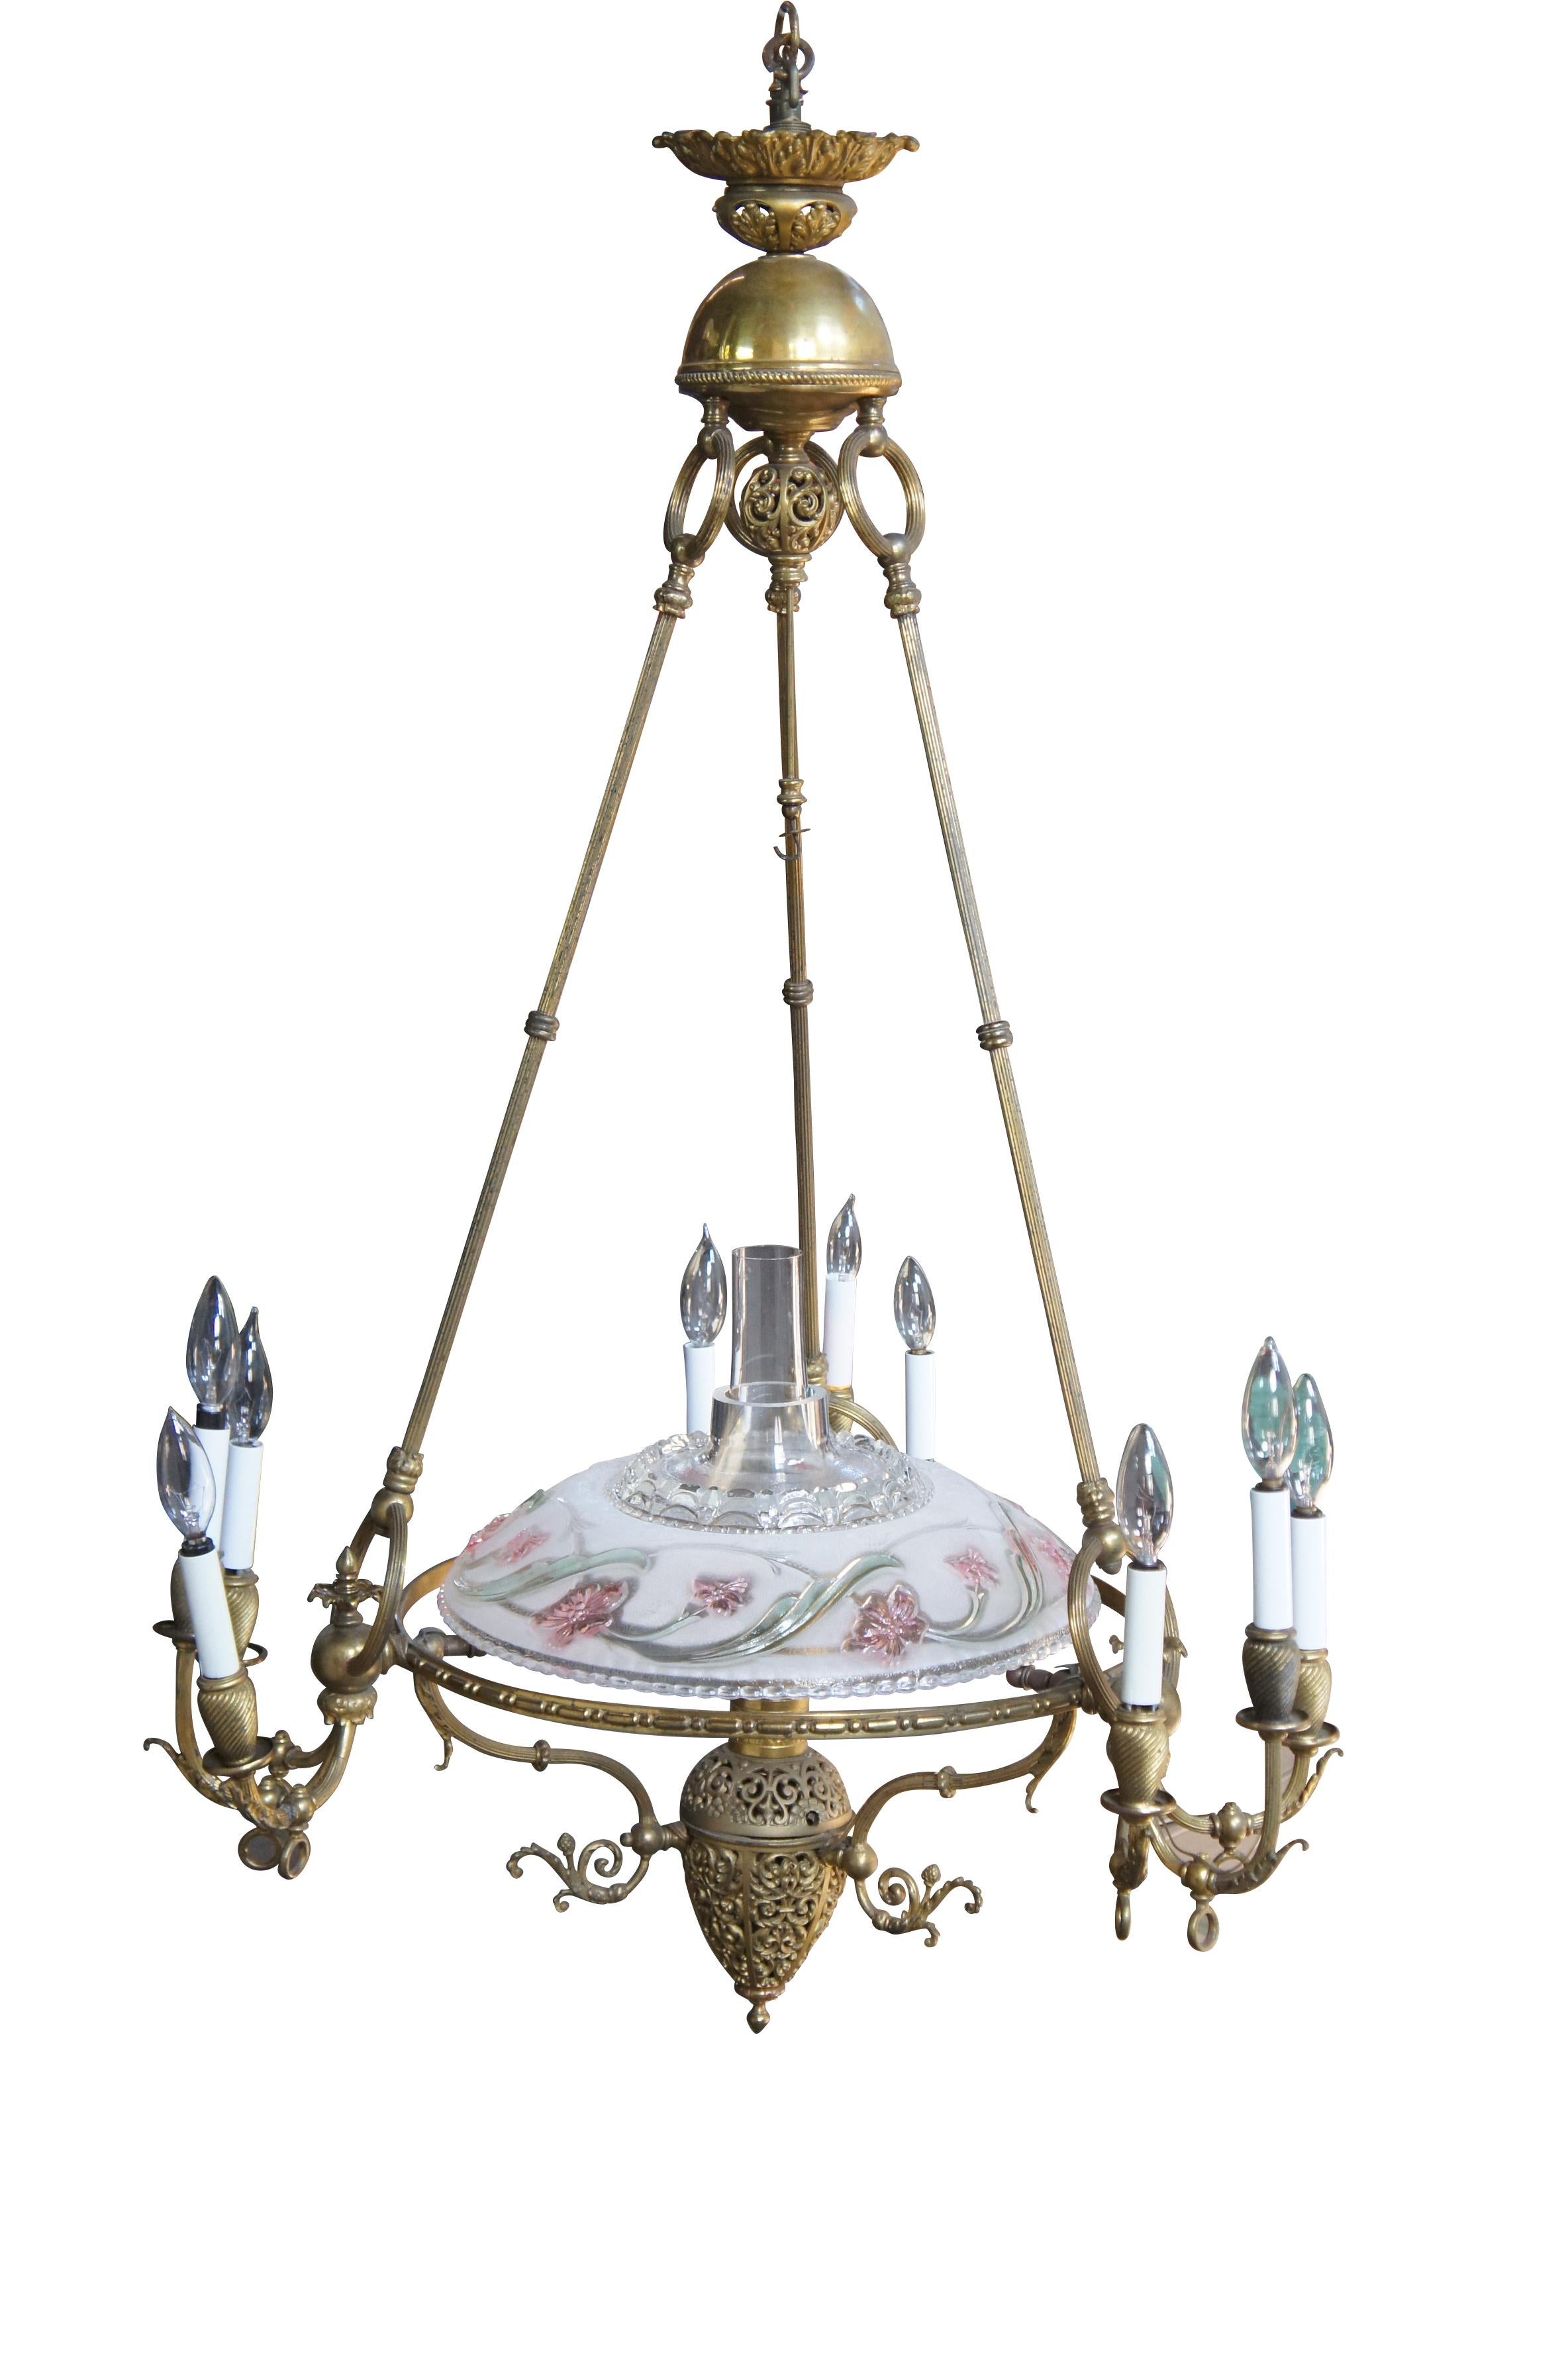 An impressive Victorian era Neoclassical converted gas chandelier.  Made from brass with ornate filigree throughout.  The chandelier is supported by an acanthus medallion that leads to a reverse urn over reeded rings and rods.  The three rods lead